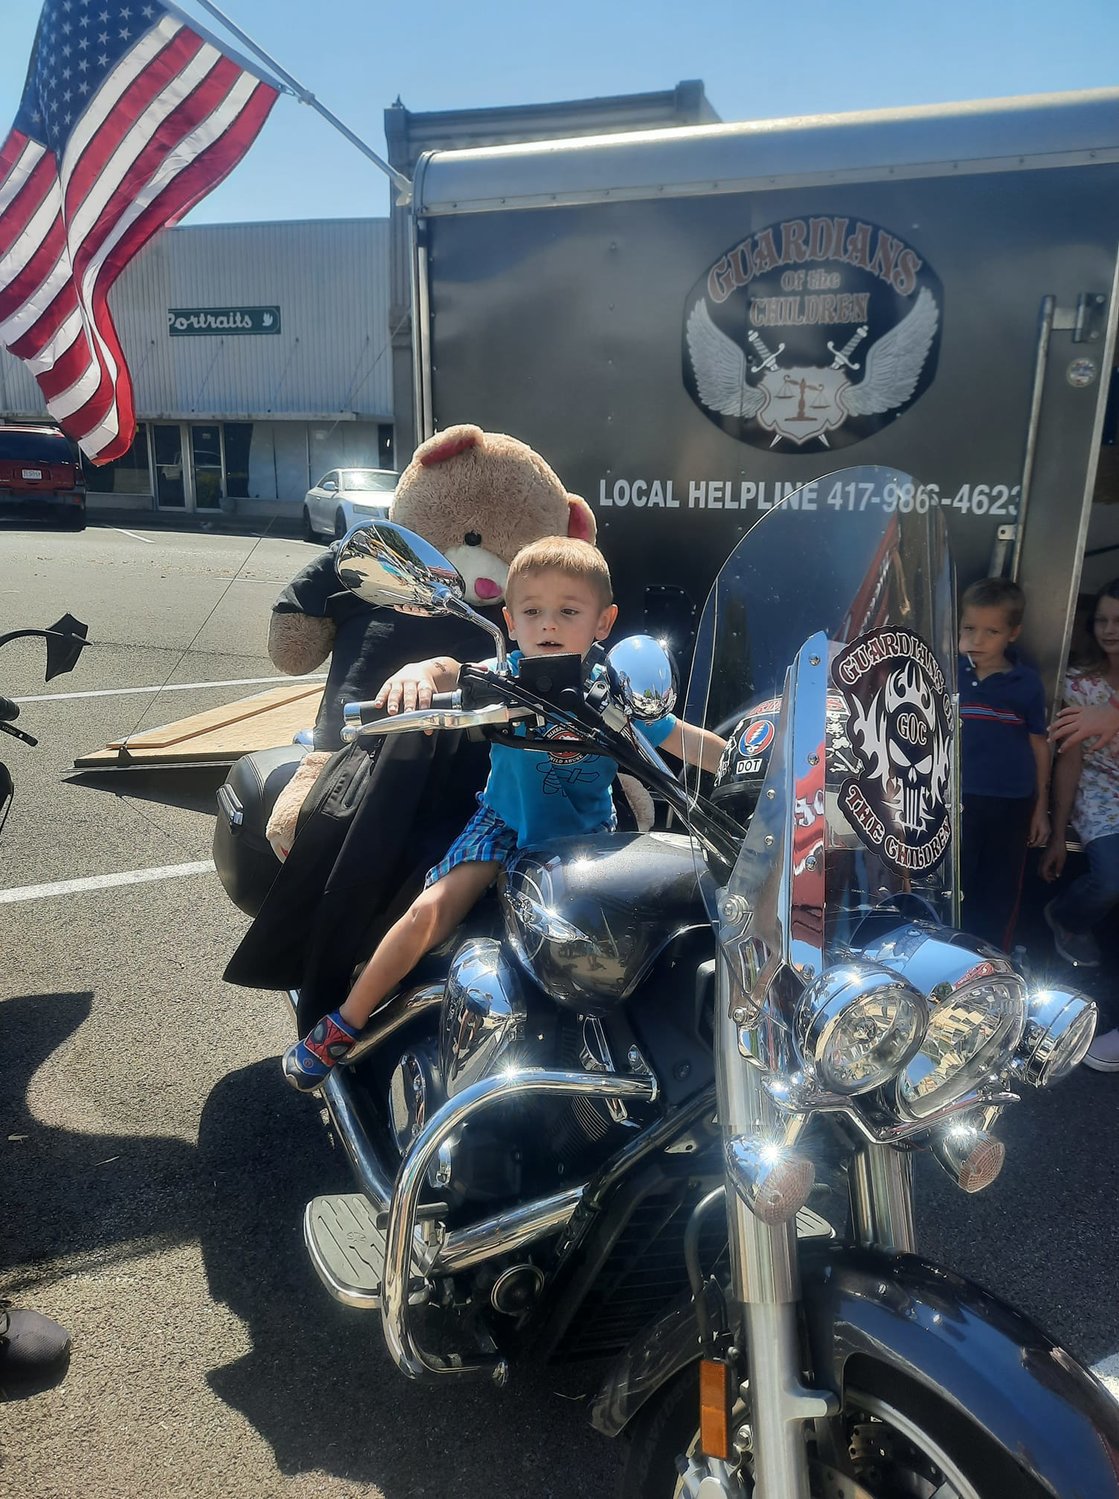 Ryder Venable, age 4, takes a turn on the motorcycle brought by Guardians of the Children.